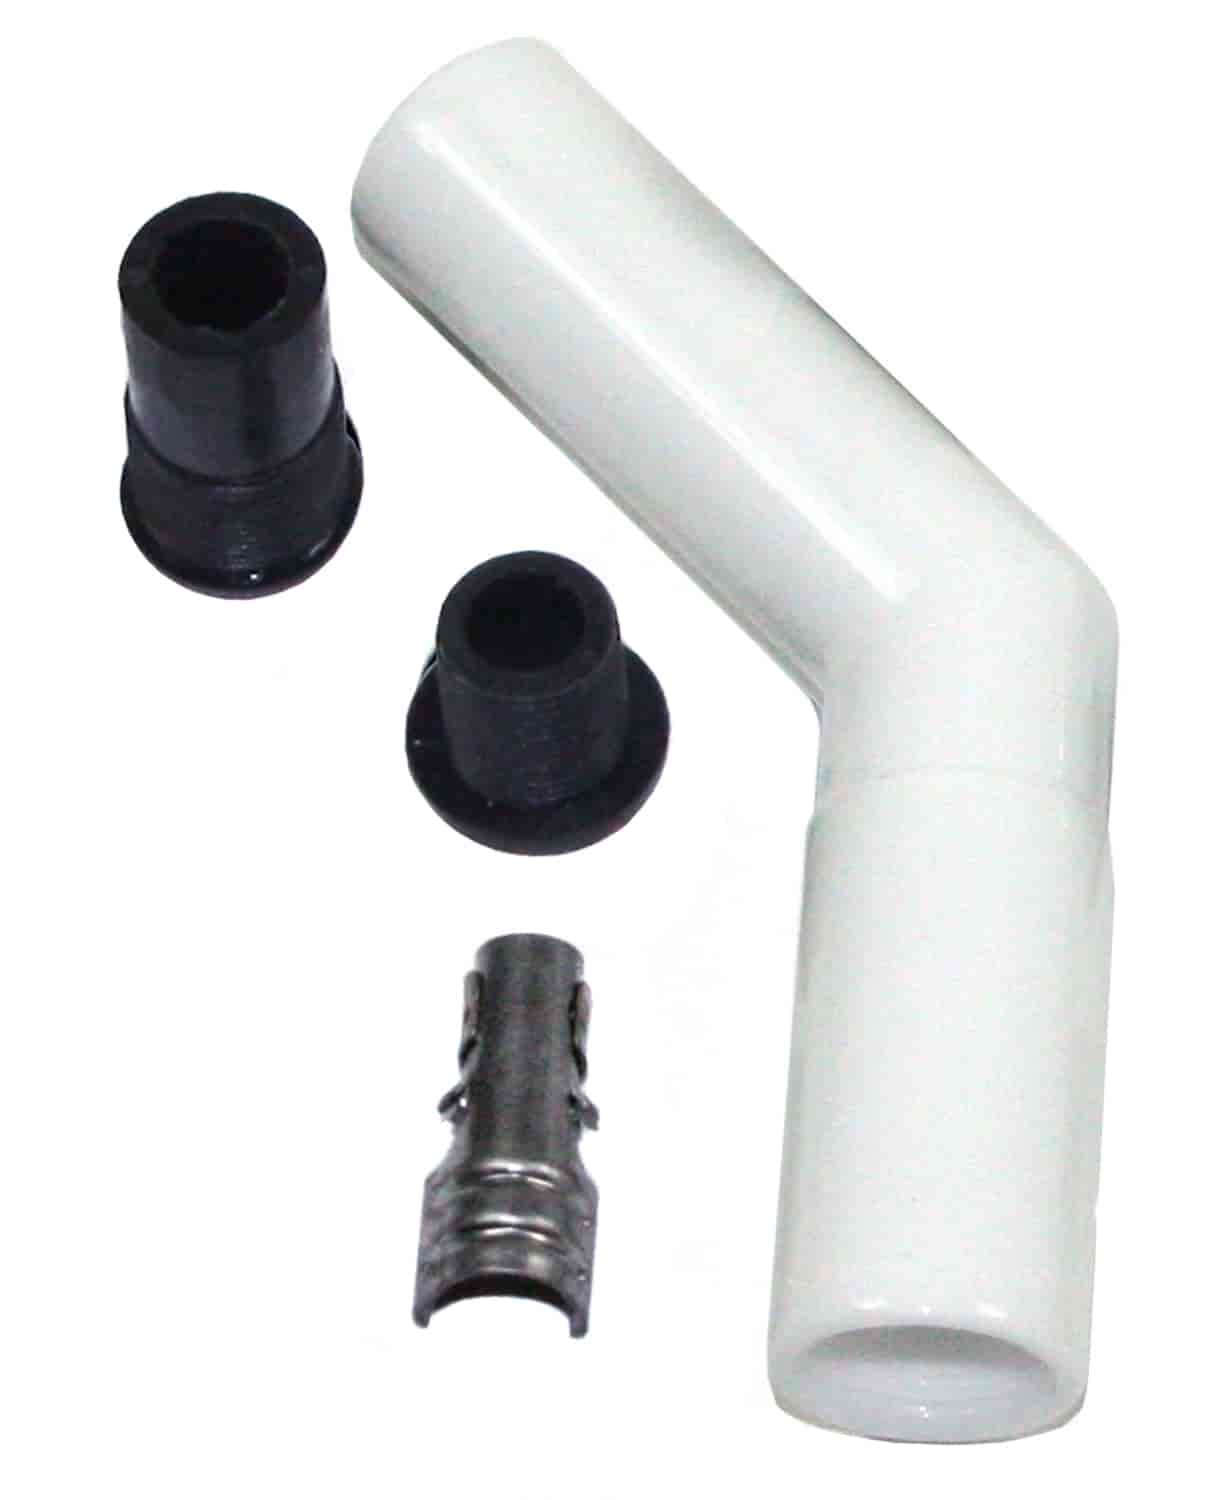 White Ceramic Spark Plug Boot - 45 Degree - Fits 8 mm Wire